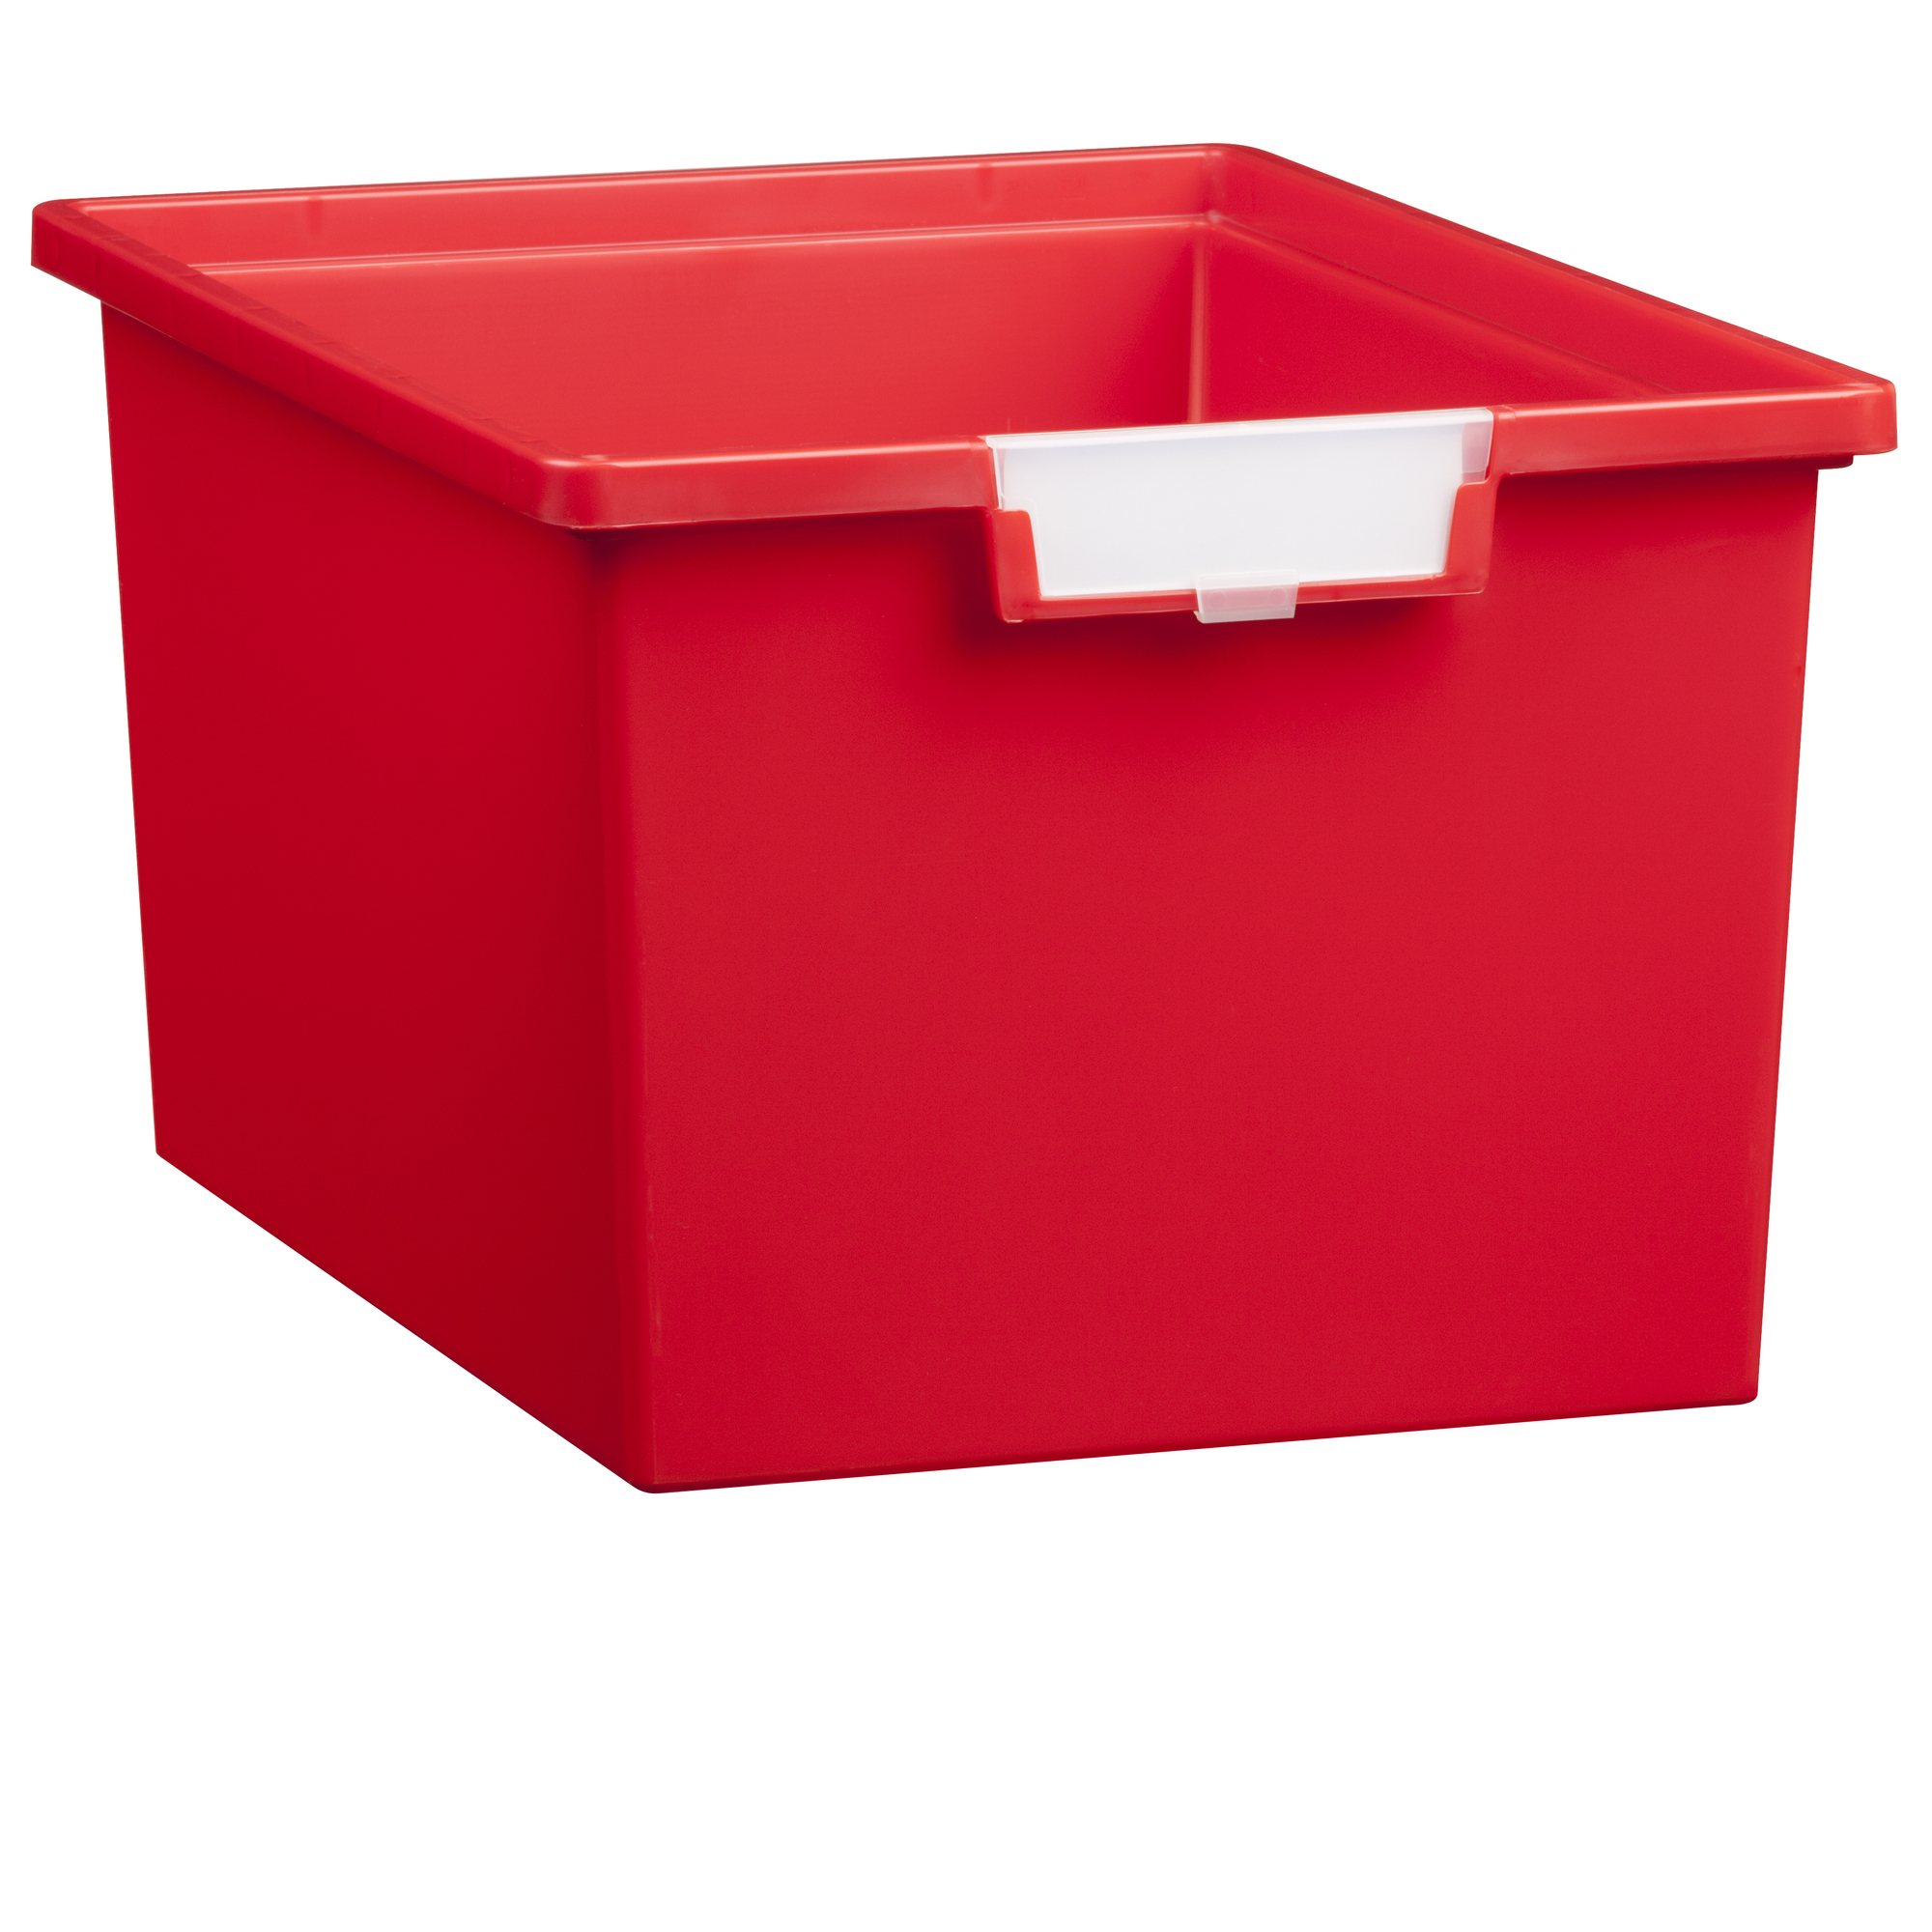 Certwood StorWerks, Slim Line 9Inch Tray in Primary Red-1PK, Included (qty.) 1 Height 9 in, Model CE1953PR1